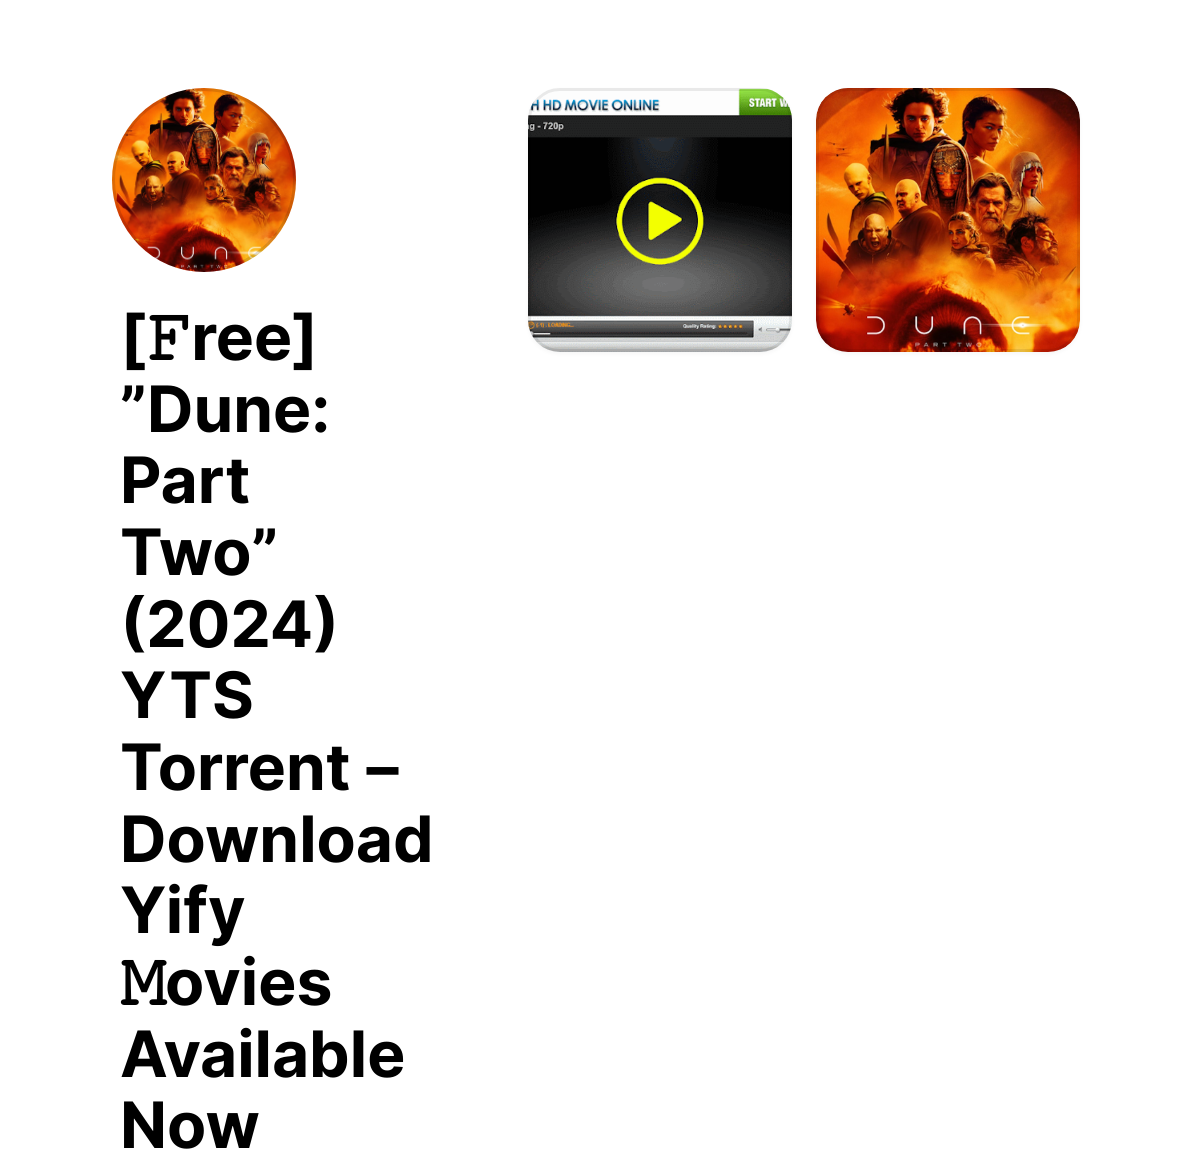 [𝙵ree] ”Dune Part Two” (2024) YTS Torrent Download Yify 𝙼ovies